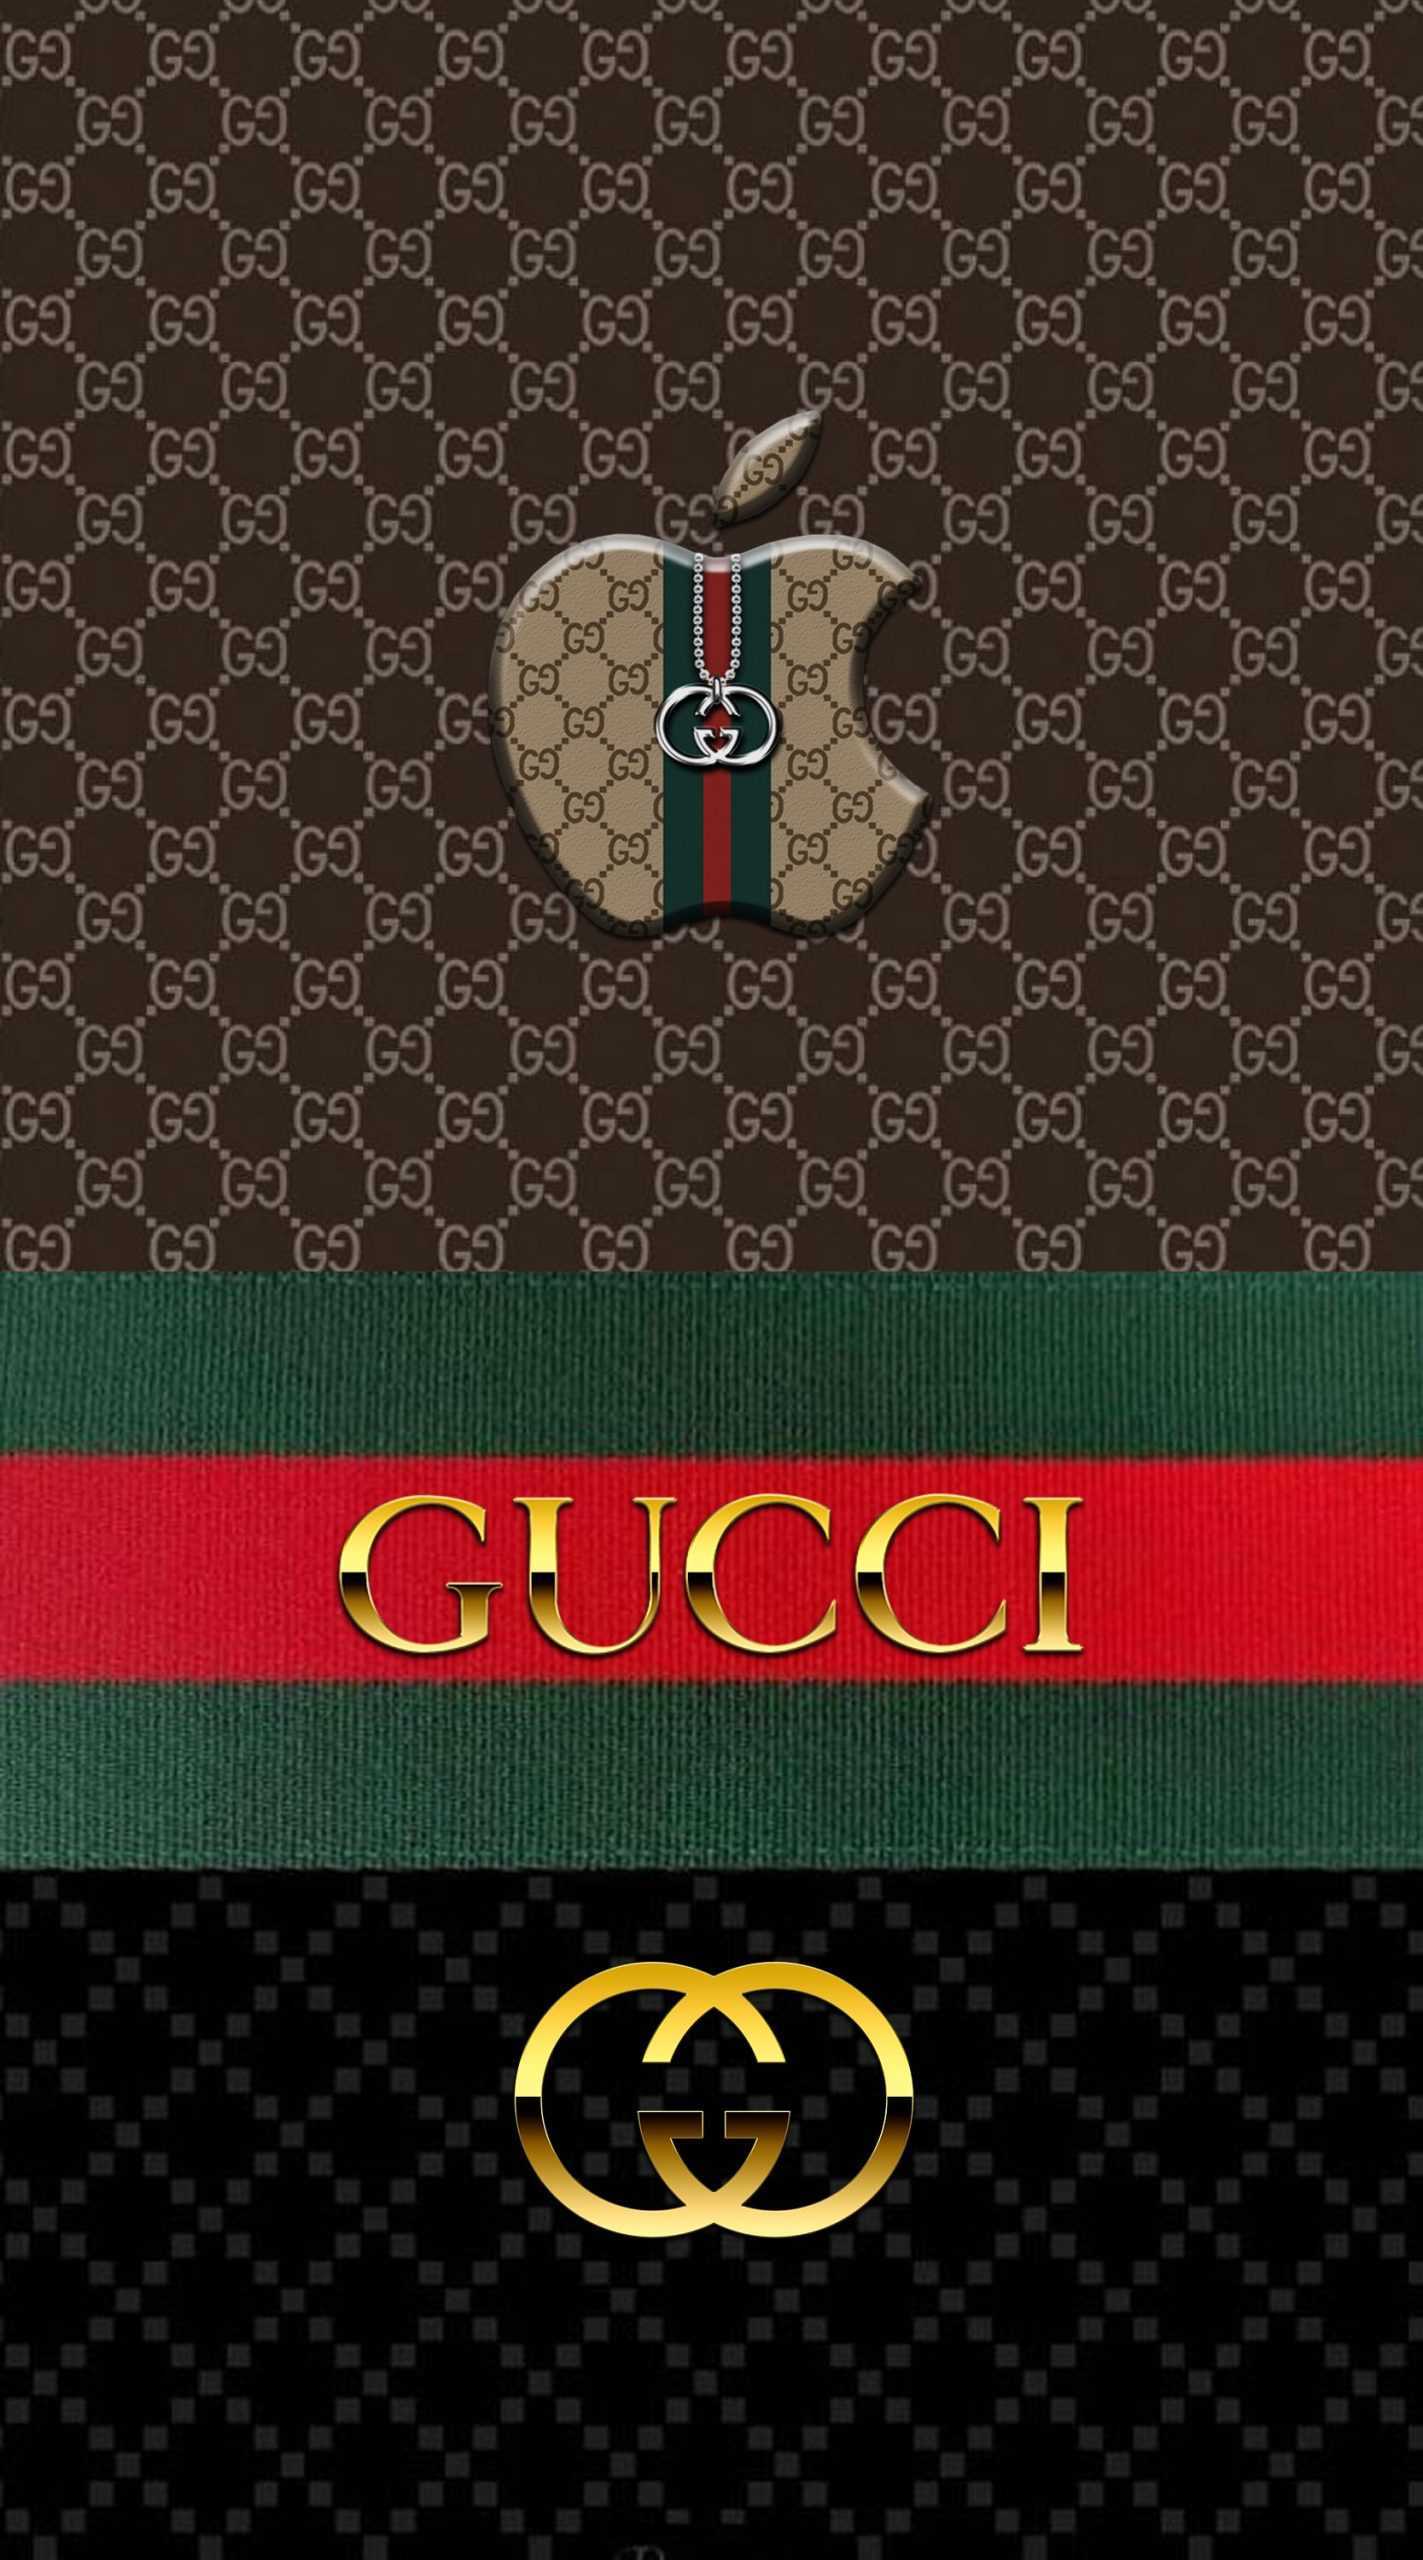 Gucci Rose Wallpapers